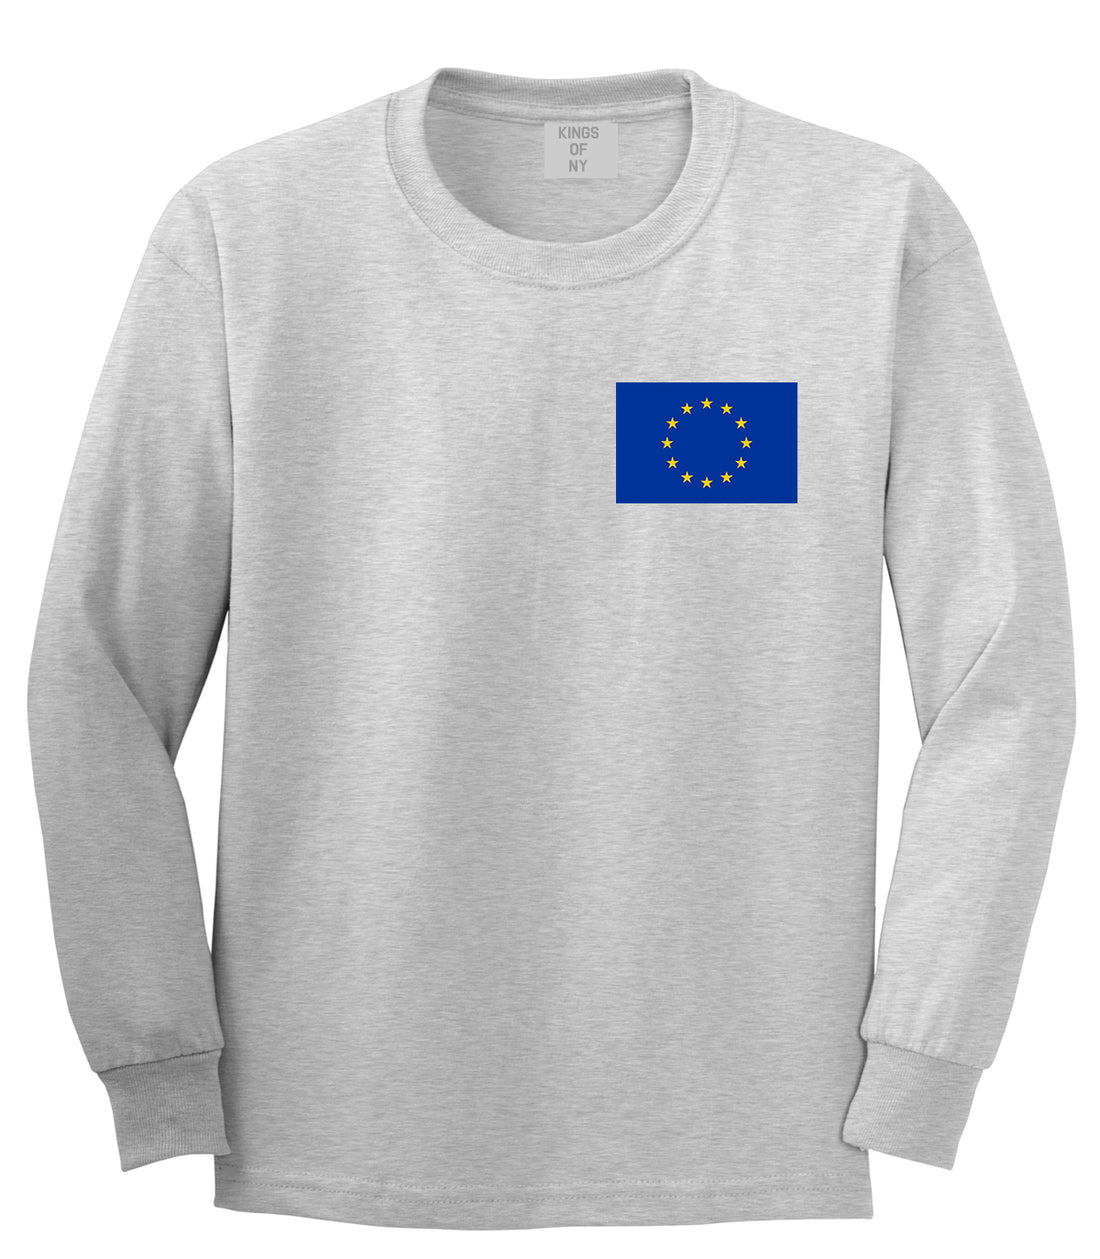 European Union Flag Chest Mens Grey Long Sleeve T-Shirt by KINGS OF NY